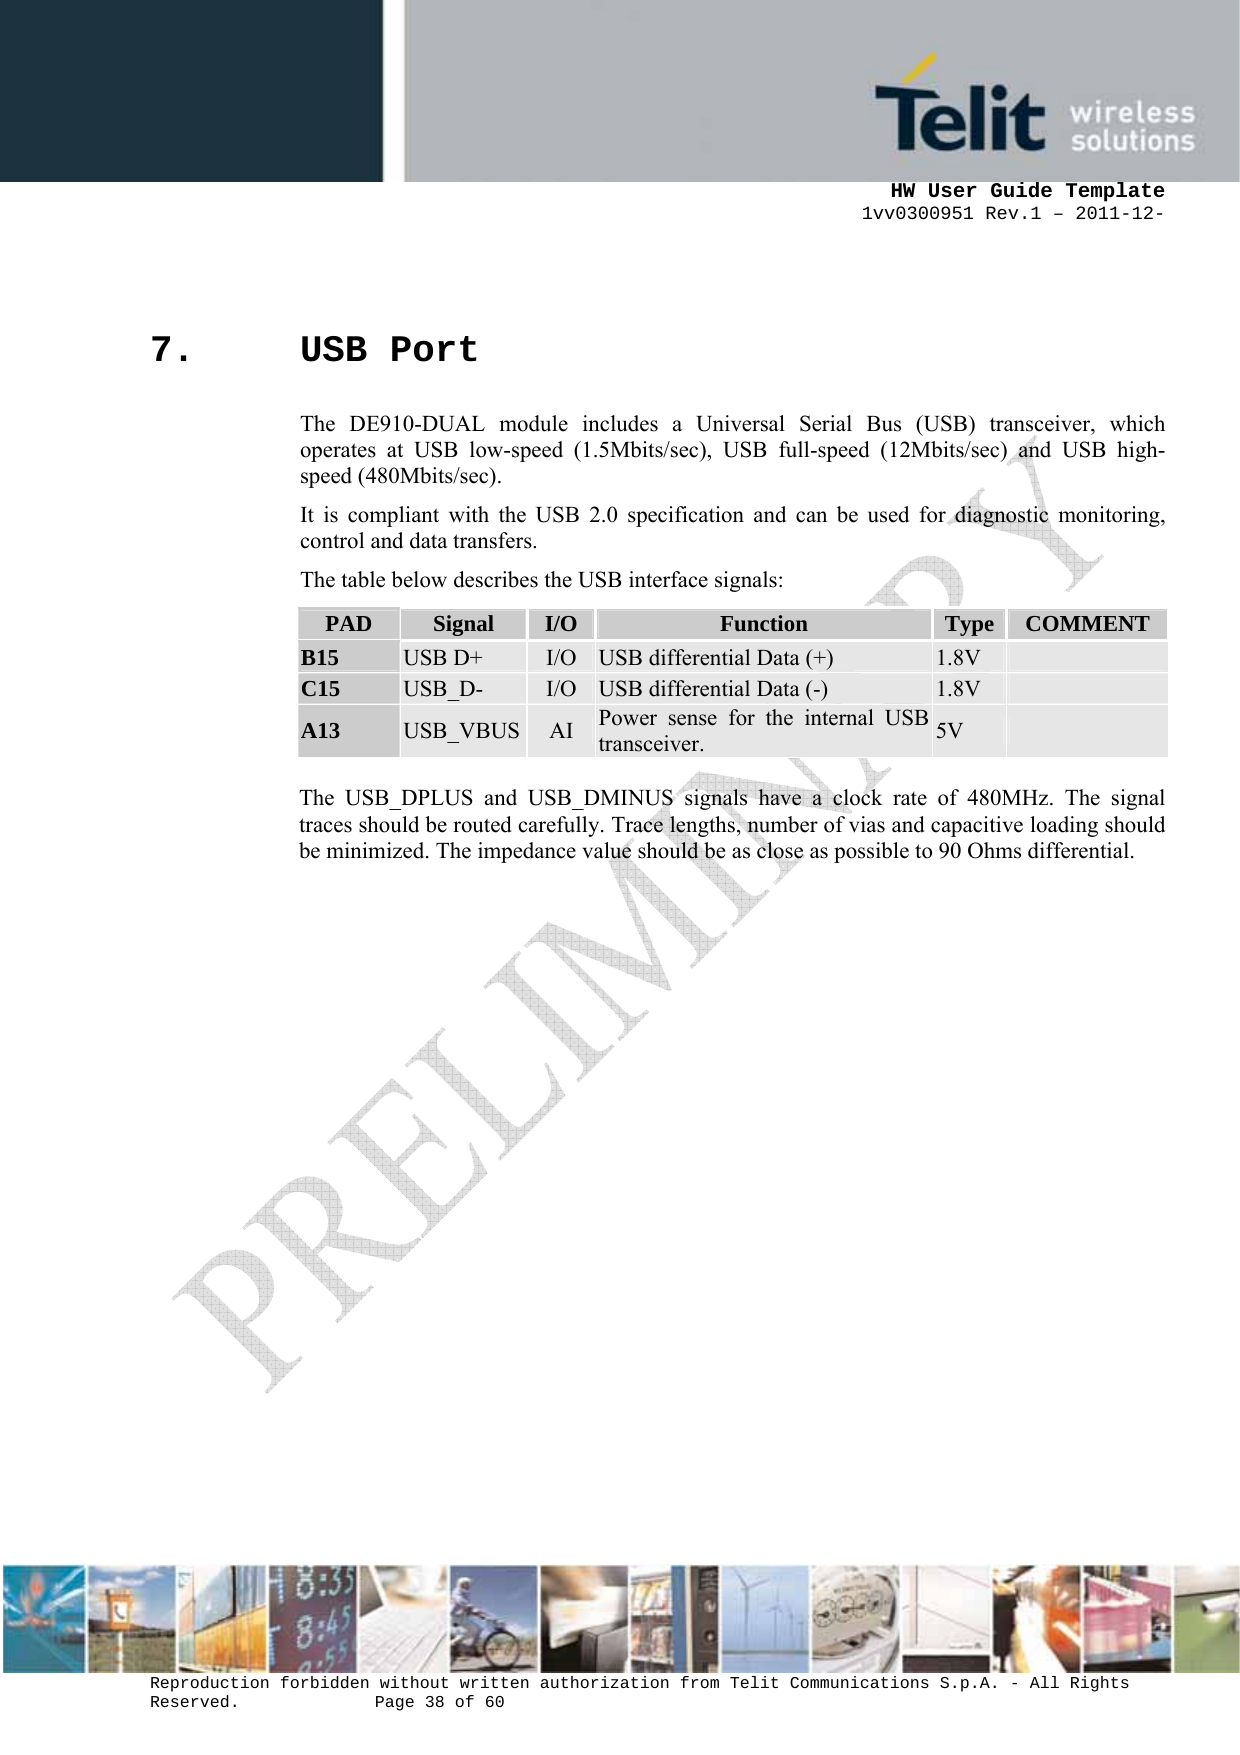      HW User Guide Template 1vv0300951 Rev.1 – 2011-12-  Reproduction forbidden without written authorization from Telit Communications S.p.A. - All Rights Reserved.    Page 38 of 60                                                     7. USB Port The DE910-DUAL module includes a Universal Serial Bus (USB) transceiver, which operates at USB low-speed (1.5Mbits/sec), USB full-speed (12Mbits/sec) and USB high-speed (480Mbits/sec).  It is compliant with the USB 2.0 specification and can be used for diagnostic monitoring, control and data transfers. The table below describes the USB interface signals: PAD  Signal  I/O Function  Type  COMMENTB15  USB D+  I/O USB differential Data (+)  1.8V   C15  USB_D-  I/O USB differential Data (-)  1.8V   A13  USB_VBUS AI  Power sense for the internal USB transceiver.  5V    The USB_DPLUS and USB_DMINUS signals have a clock rate of 480MHz. The signal traces should be routed carefully. Trace lengths, number of vias and capacitive loading should be minimized. The impedance value should be as close as possible to 90 Ohms differential.  